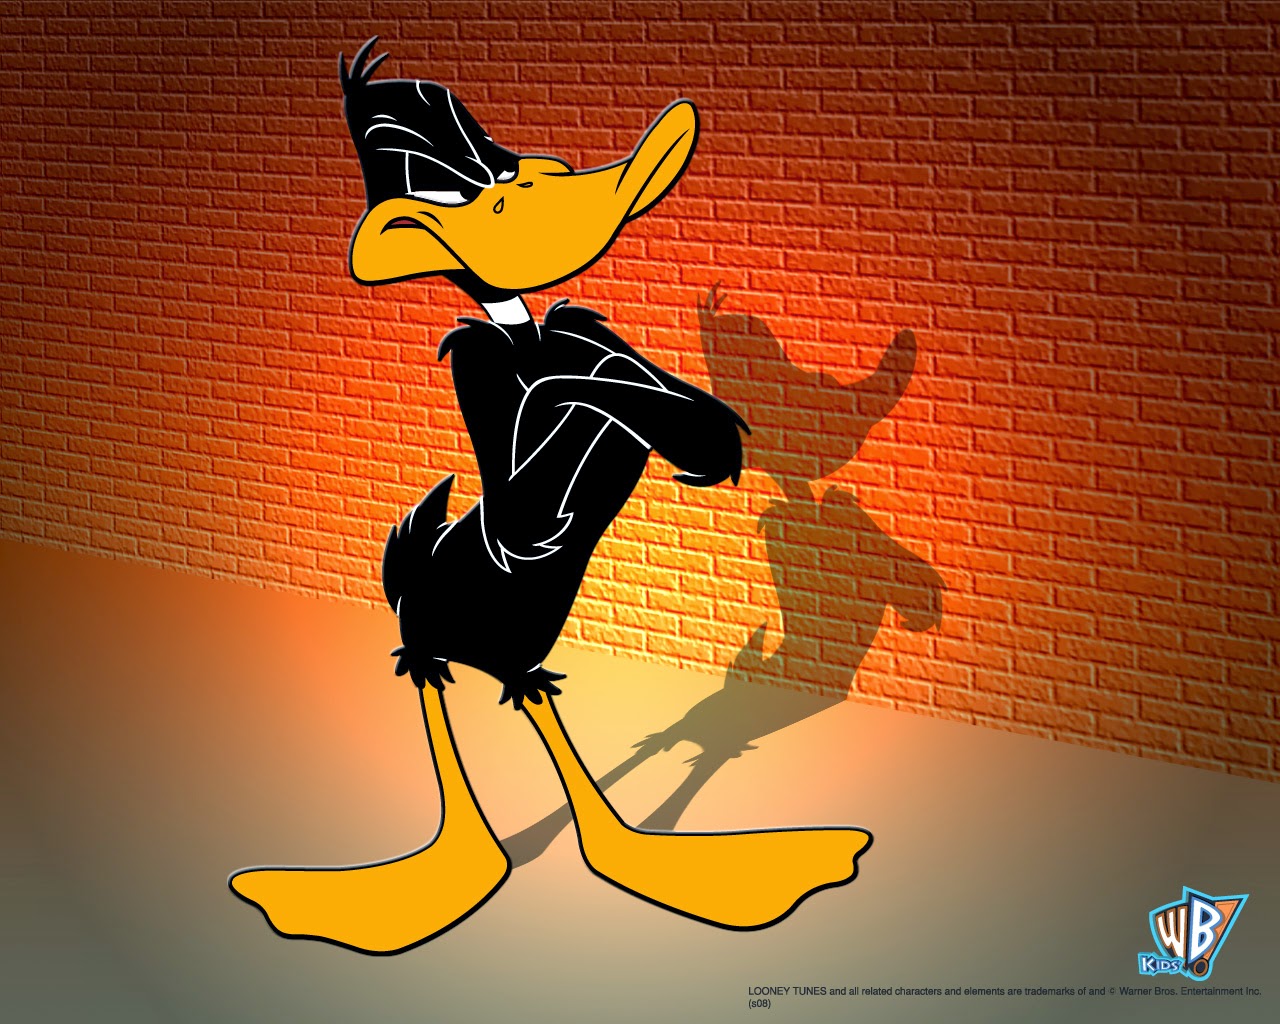 the daffy duck show